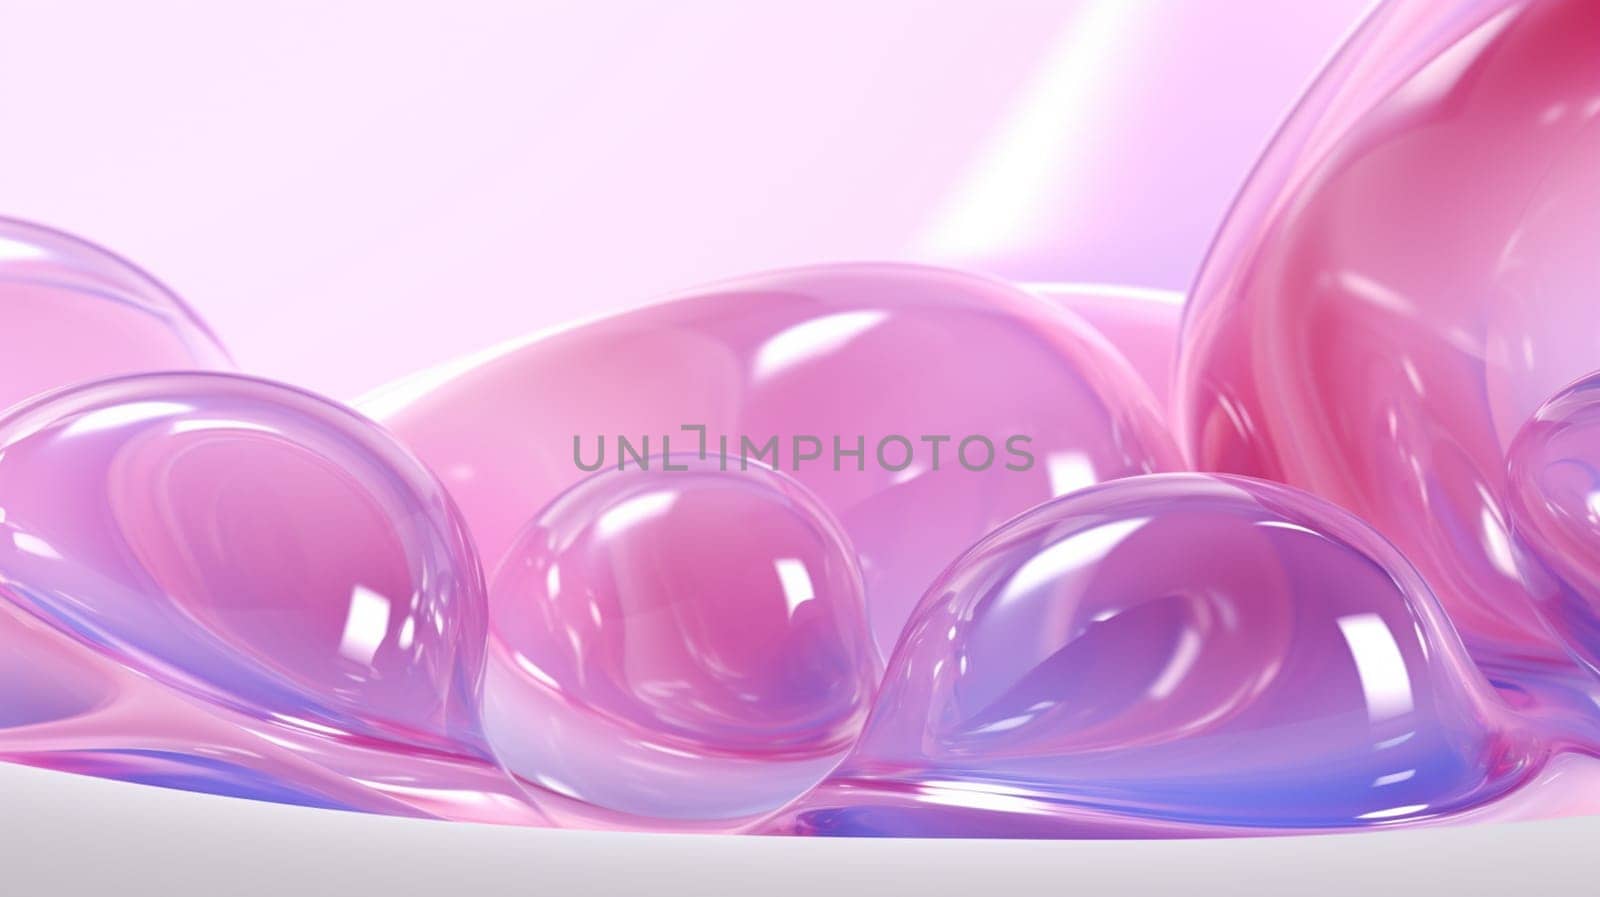 Beautiful abstract close up color pink white and purple soap bubbles background and wallpaper. High quality photo